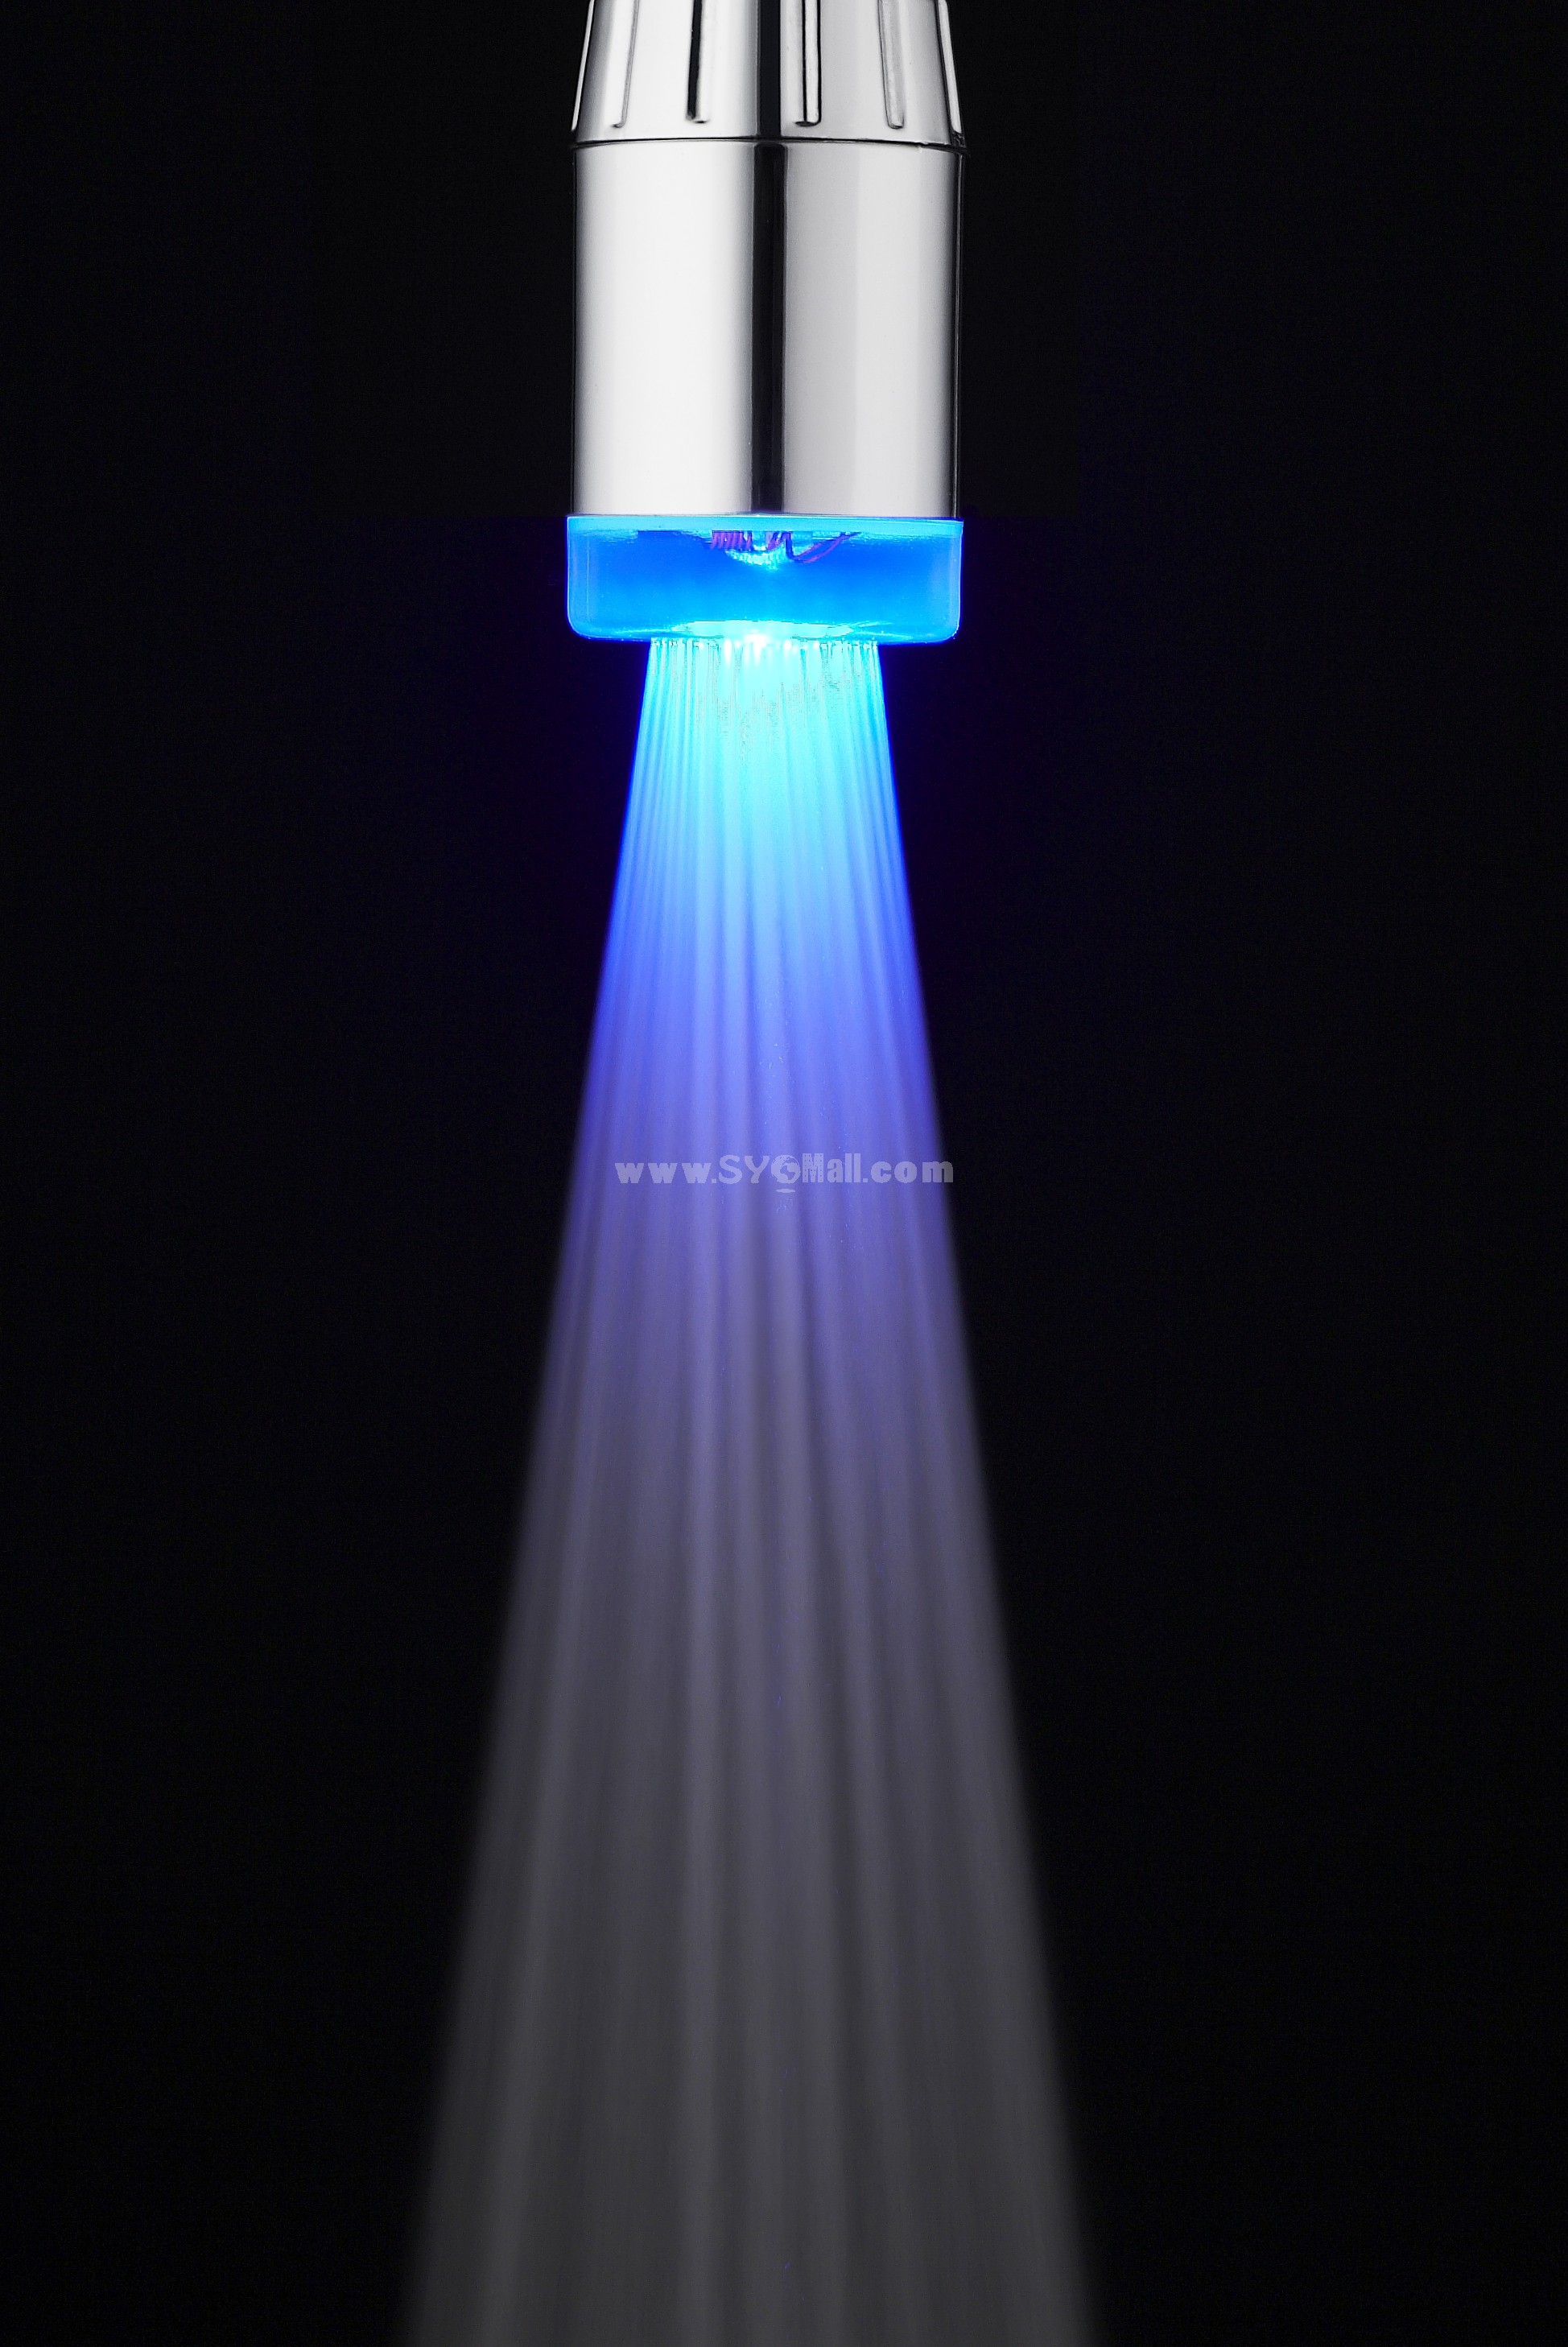 Romantic Bright Color LED Lights Faucet Mouth HY-2006W (Temperature Control Changing Color)